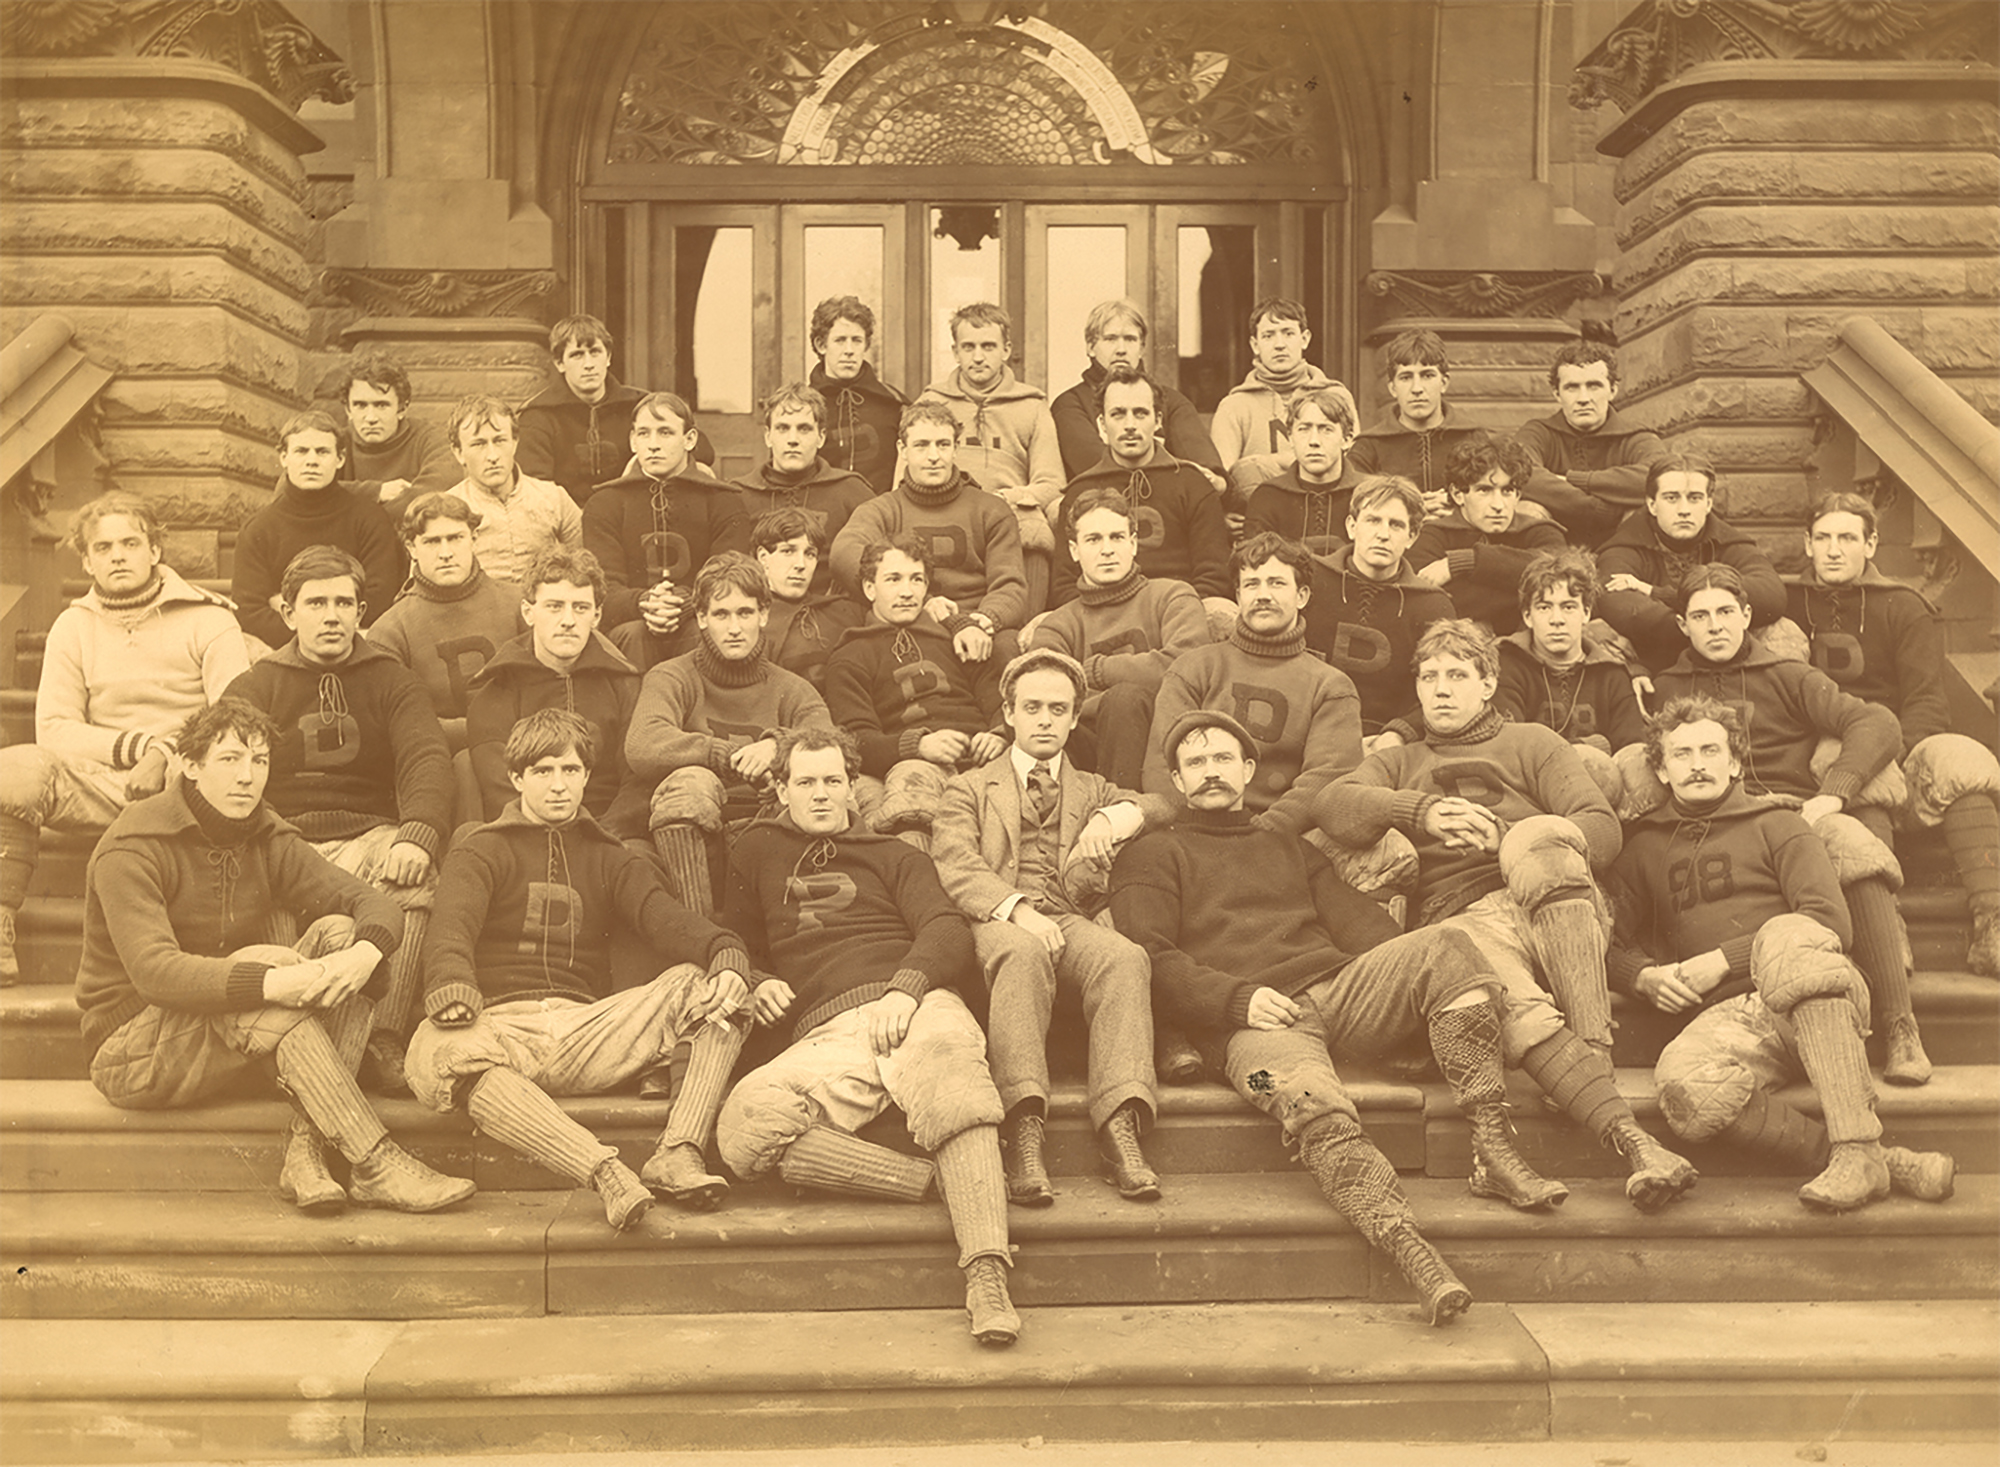 Members of Penn's 1895 football team pose together on steps.